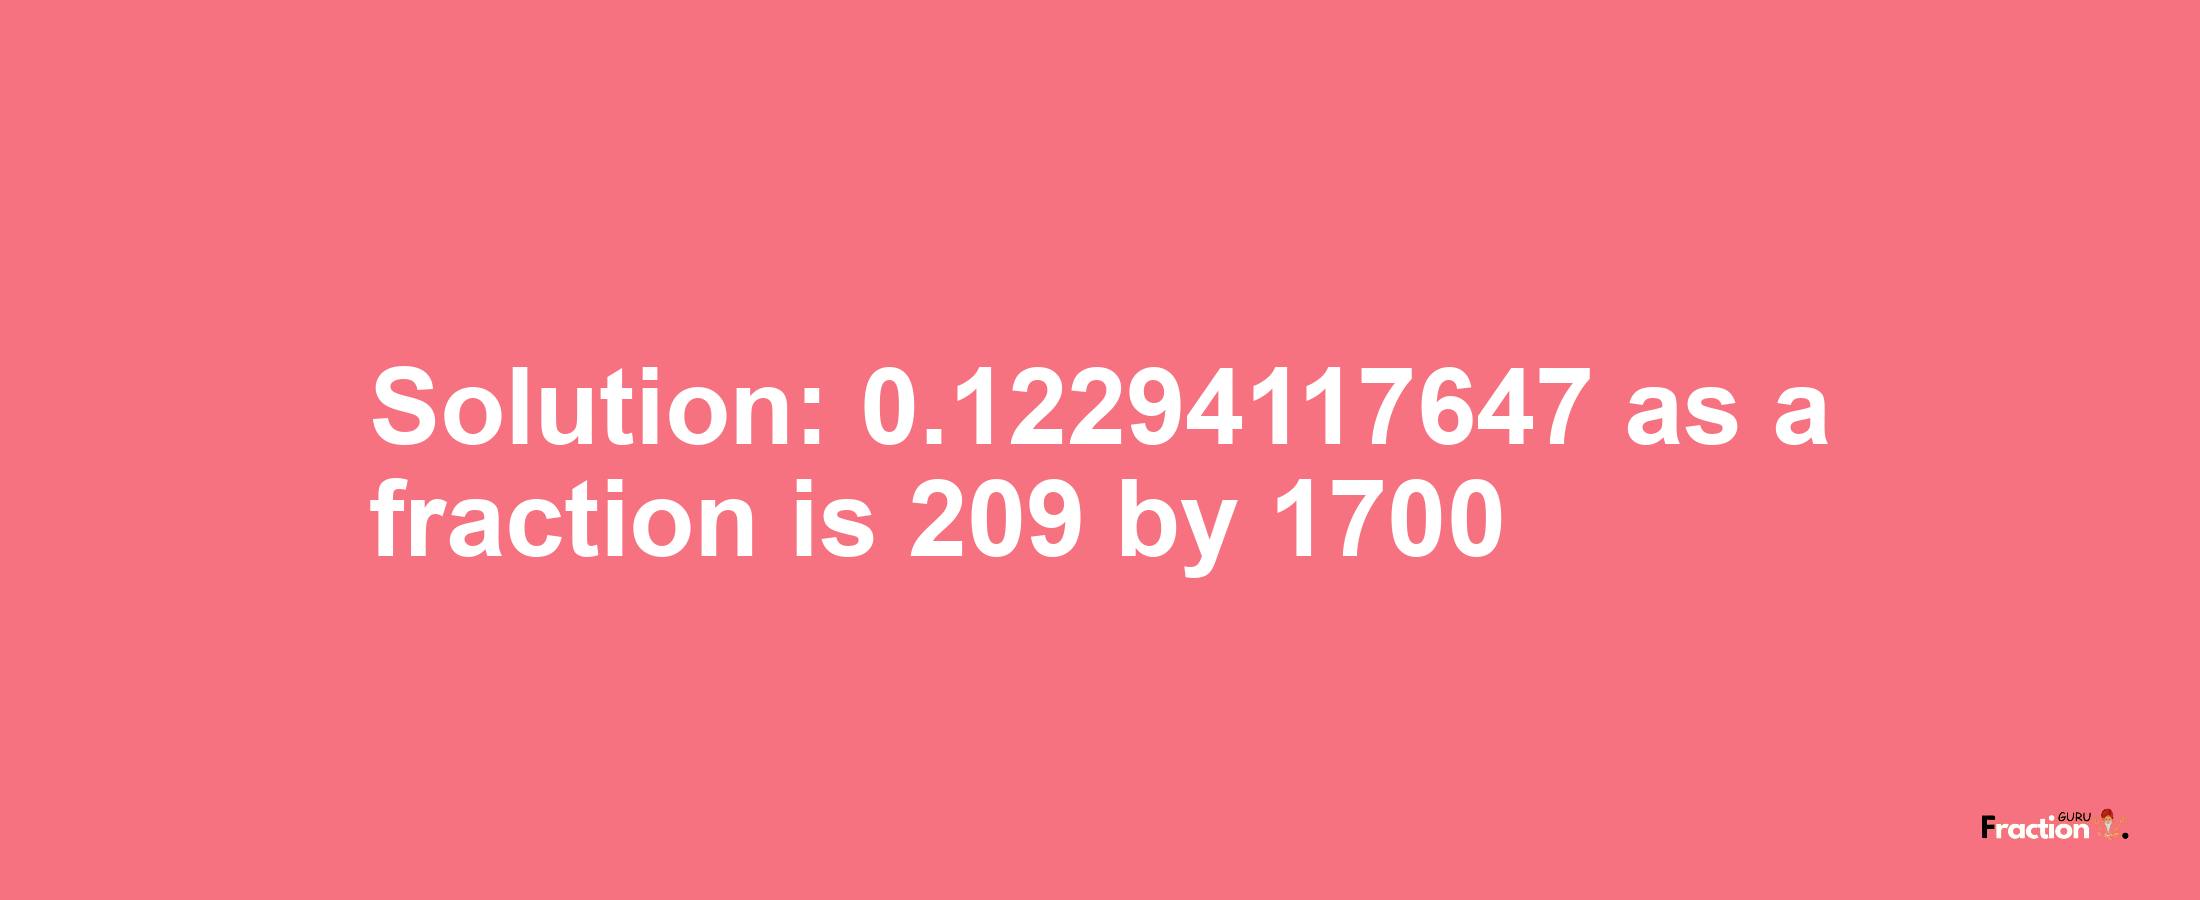 Solution:0.12294117647 as a fraction is 209/1700